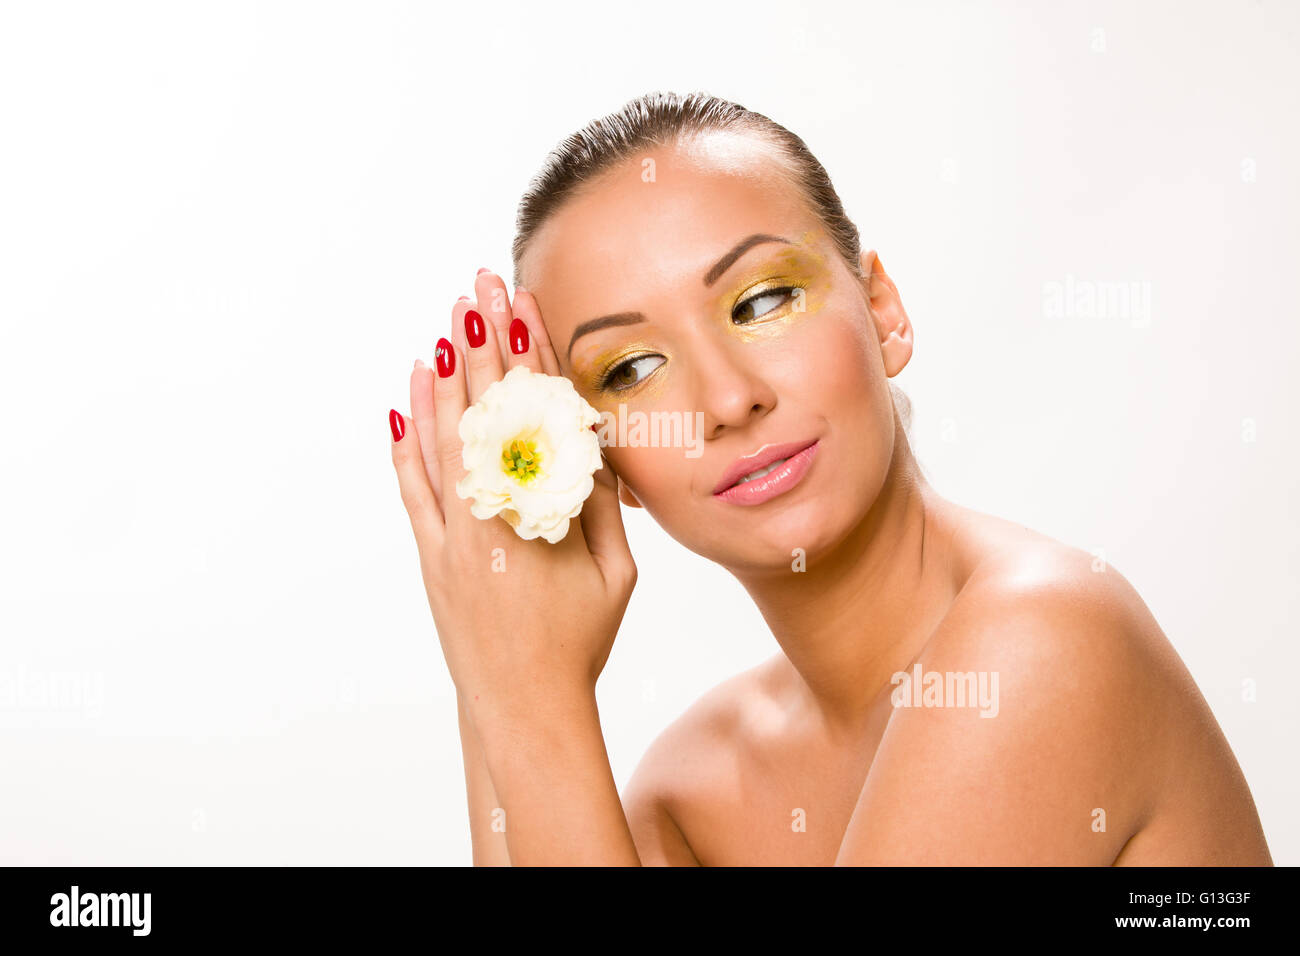 Gold make up. Brown sleek hair beautiful woman with white flower in hands close to face. Stock Photo